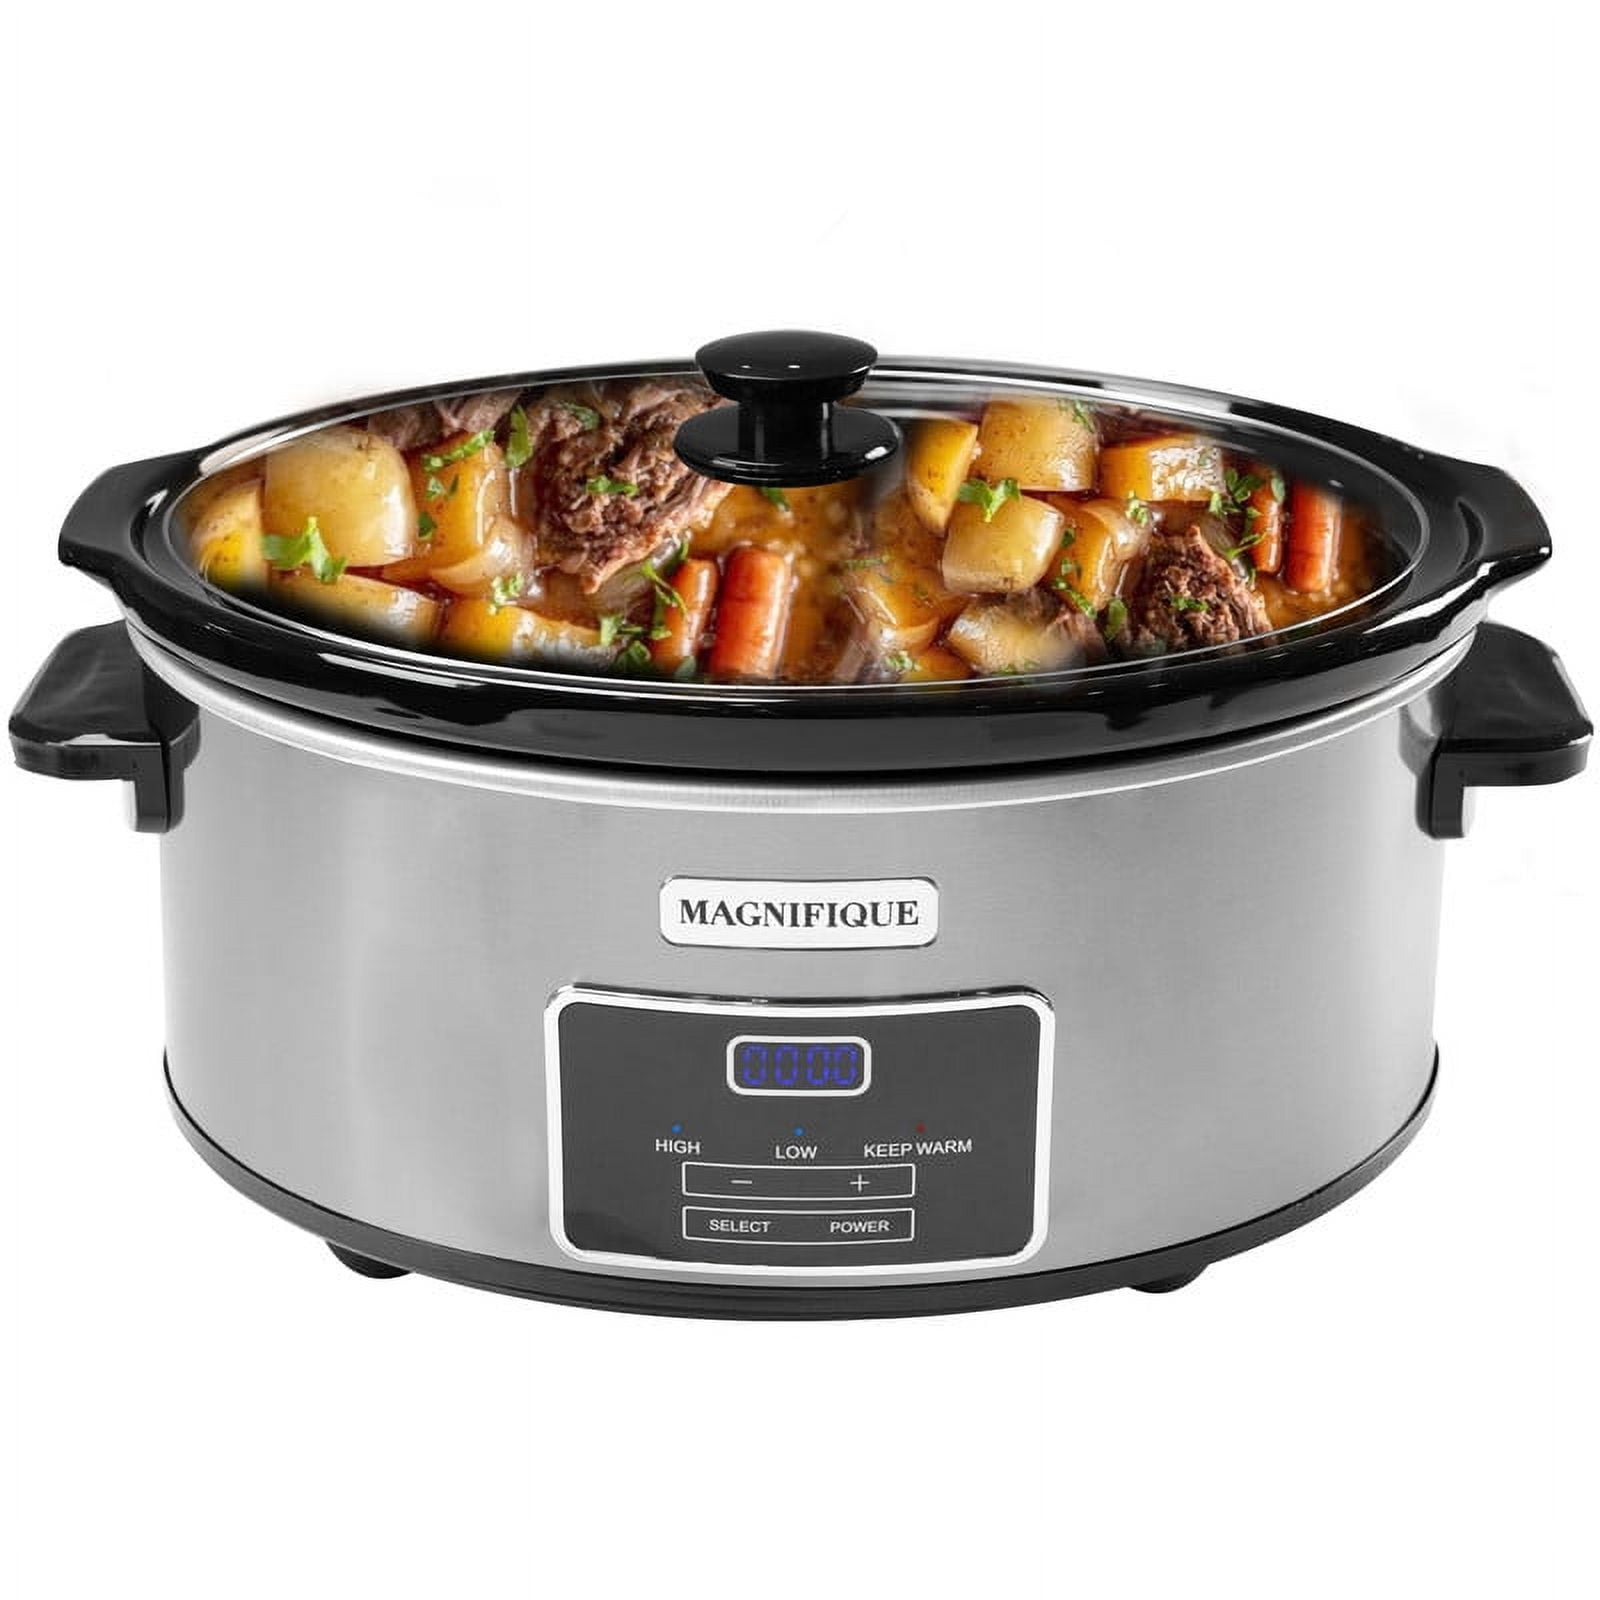 [New] Magnifique 4-Quart Slow Cooker with Casserole Digital Warm Setting - Perfect Kitchen Small Appliance for Family Dinners, Dishwasher Safe Crock